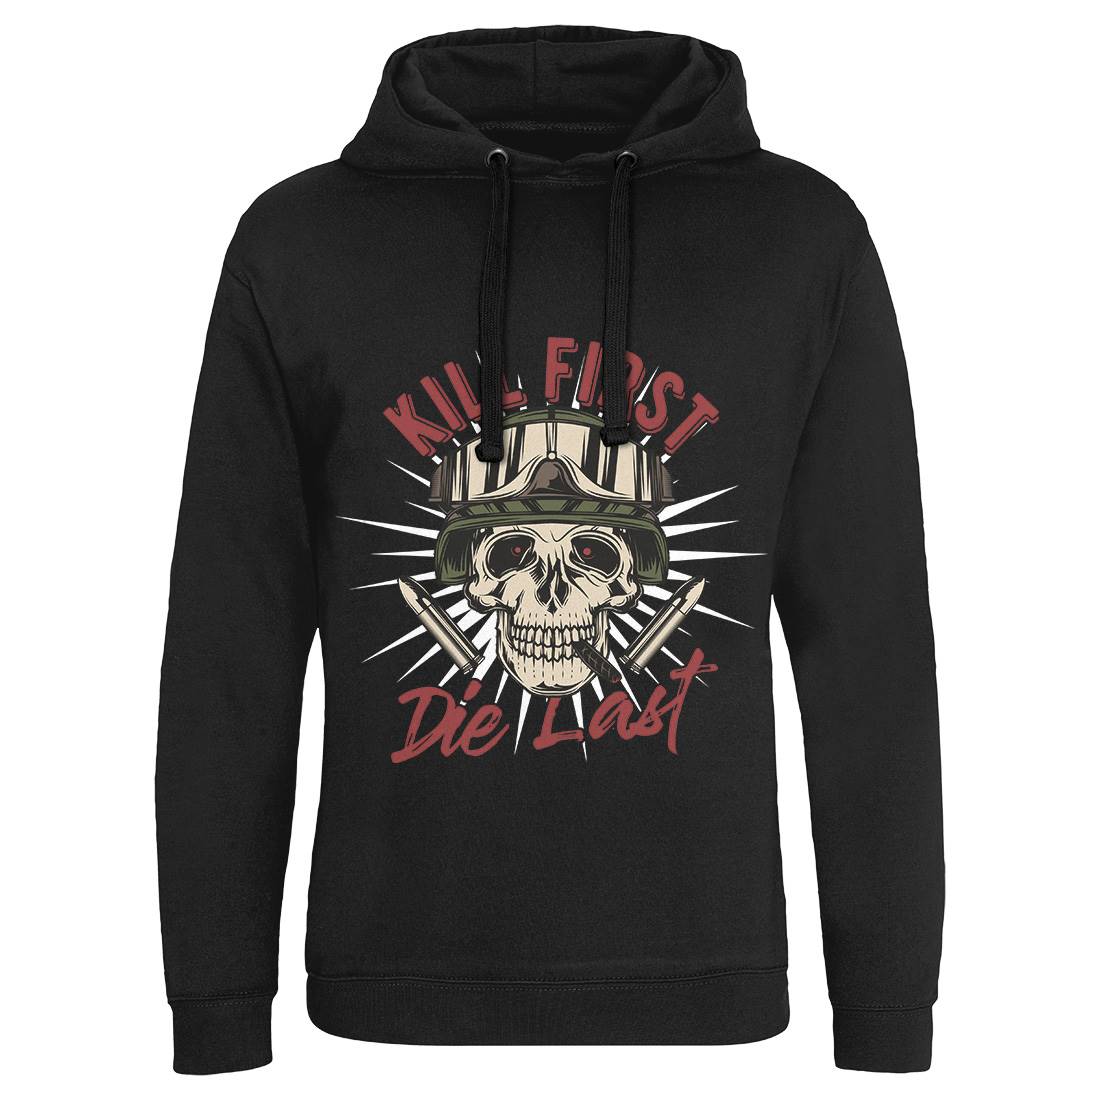 Kill First Mens Hoodie Without Pocket Army C890